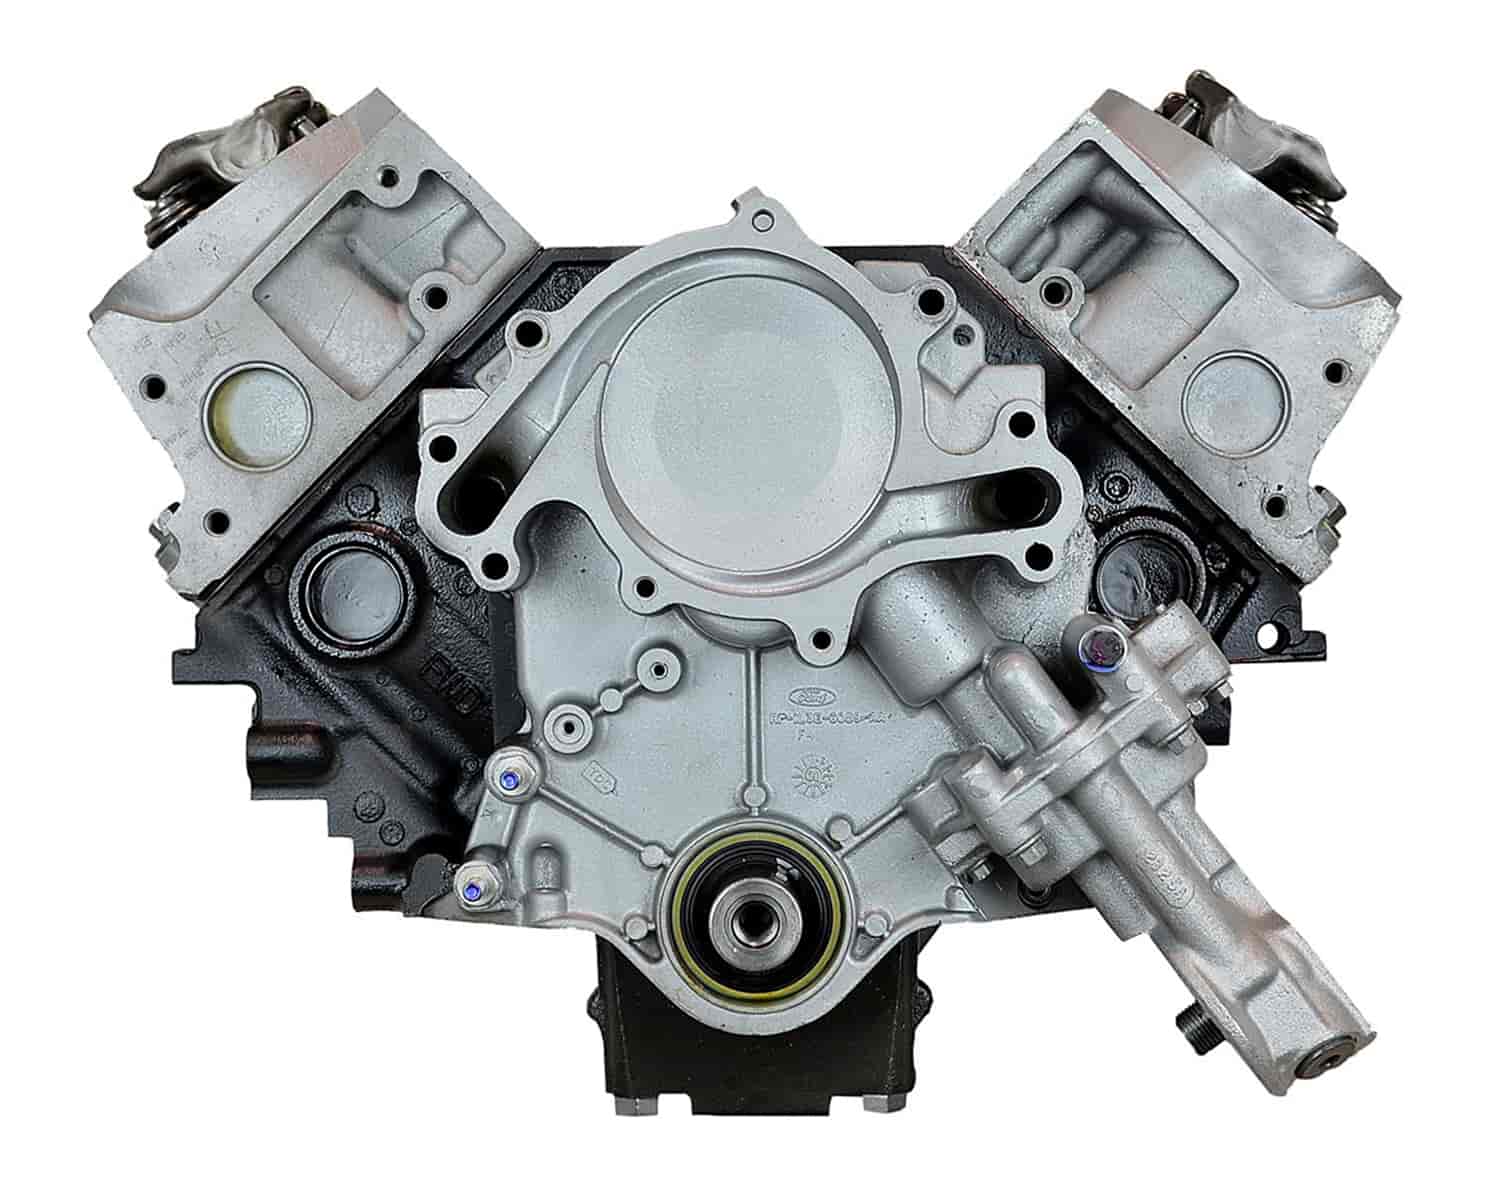 Remanufactured Crate Engine for 1997-1998 Ford Windstar with 3.8L V6